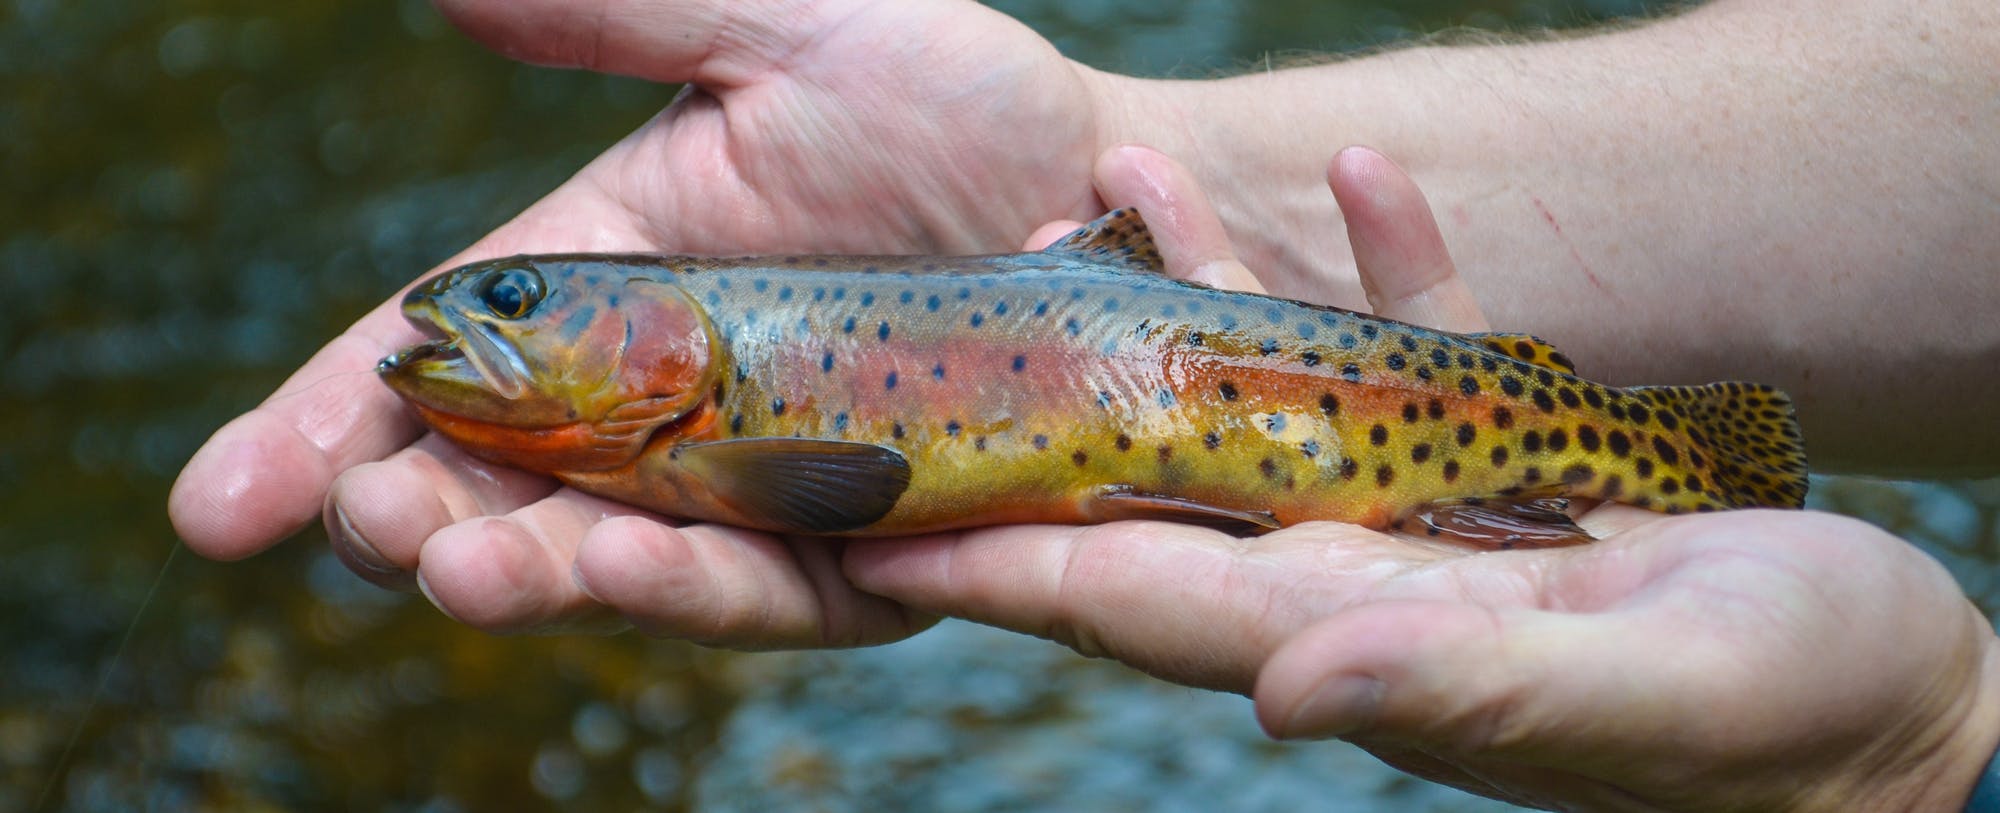 Photos From The Field: Fly Fishing In Colorado